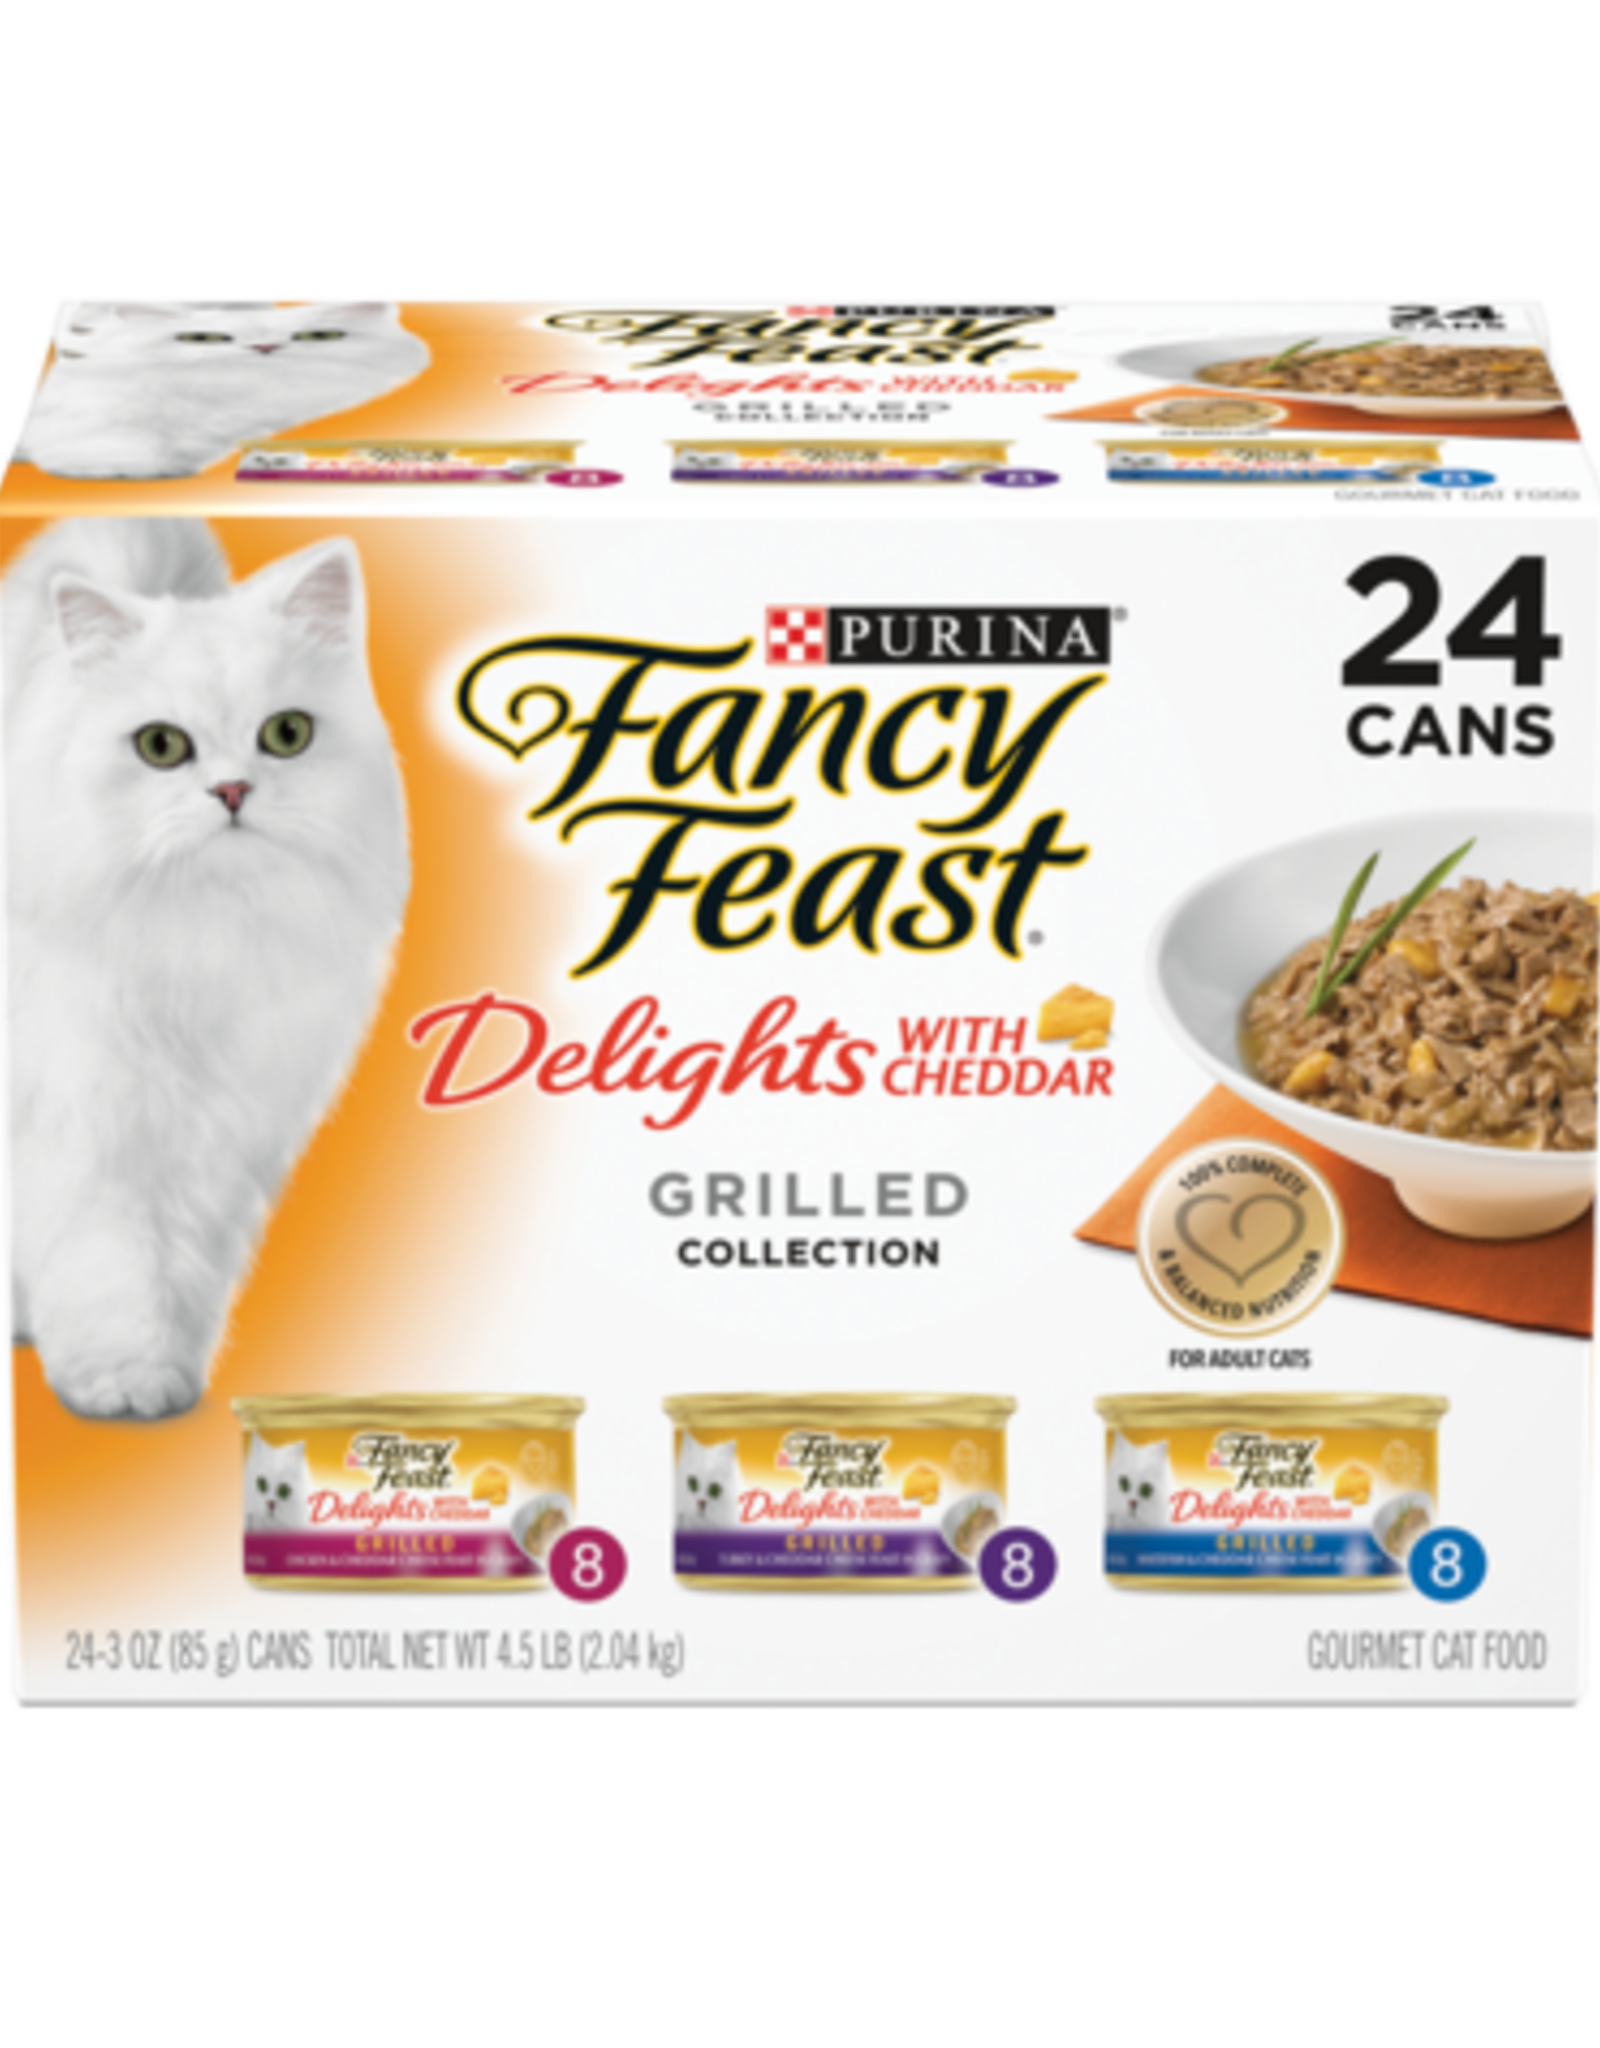 NESTLE PURINA PETCARE FANCY FEAST DELIGHTS W/ CHEDDAR GRILLED VARIETY CANS 24 PACK